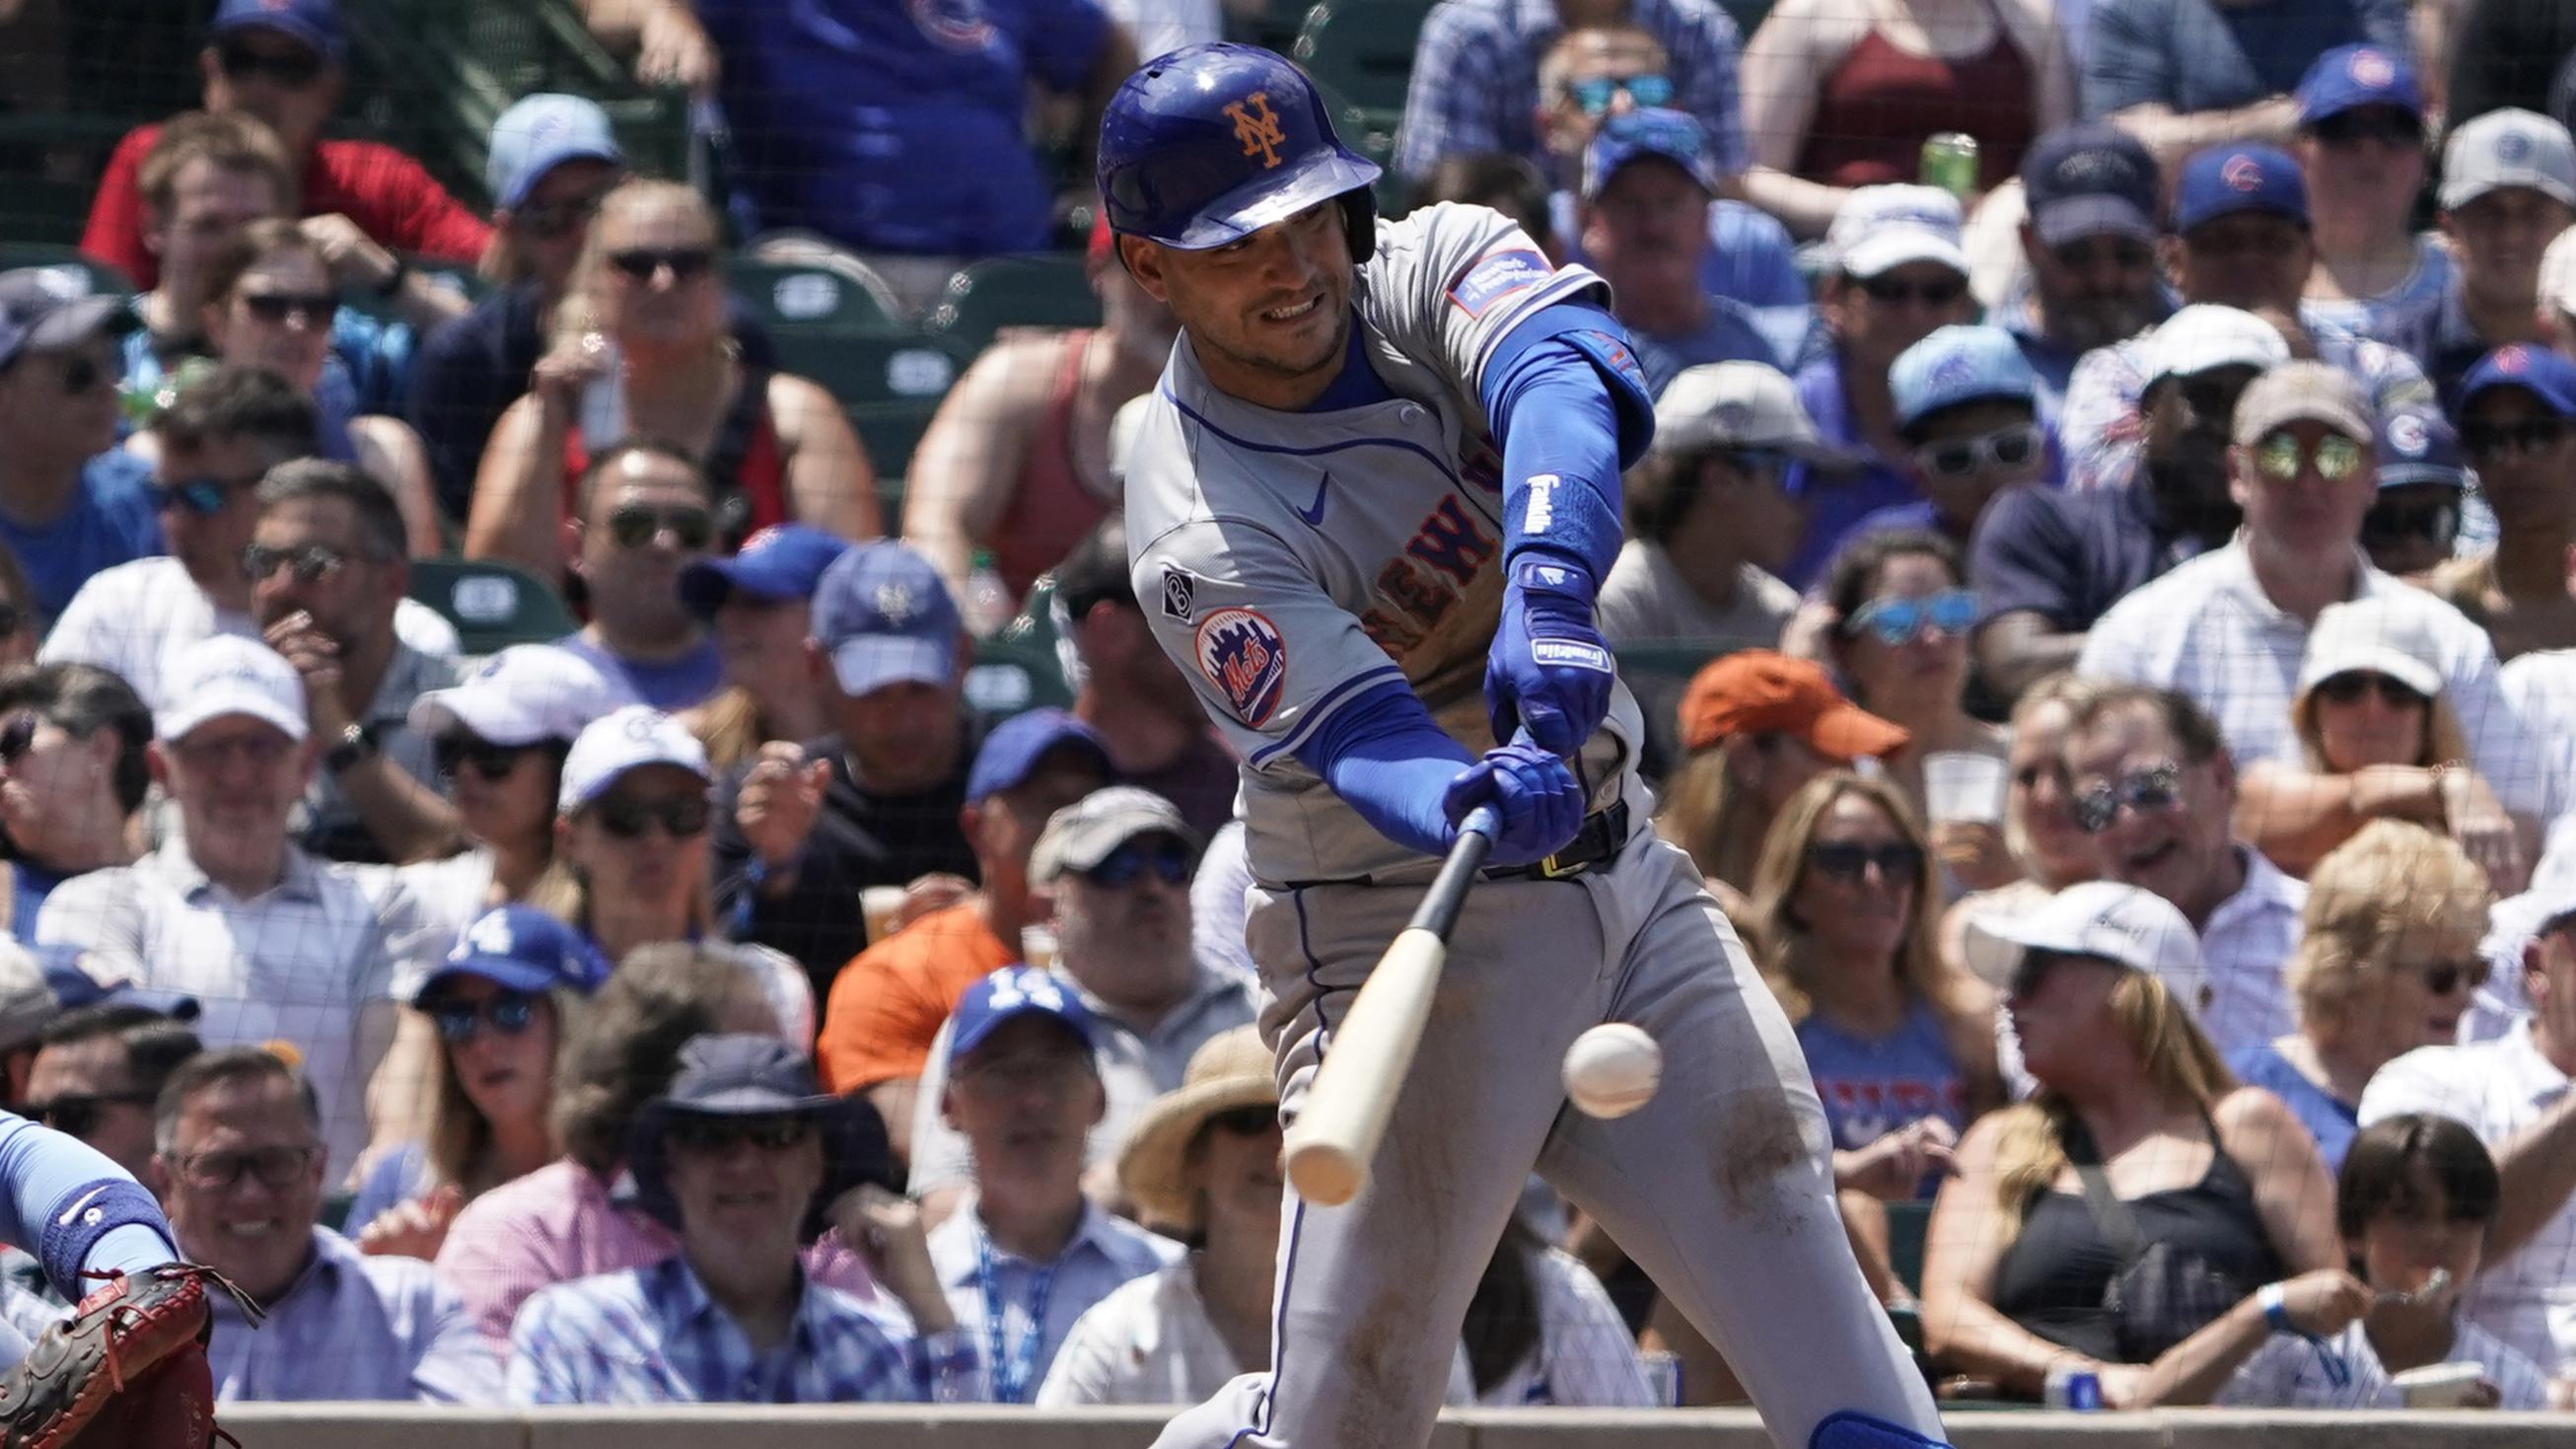 New York Mets second baseman Jose Iglesias (11) hits a single against the New York Mets during the third inning at Wrigley Field.